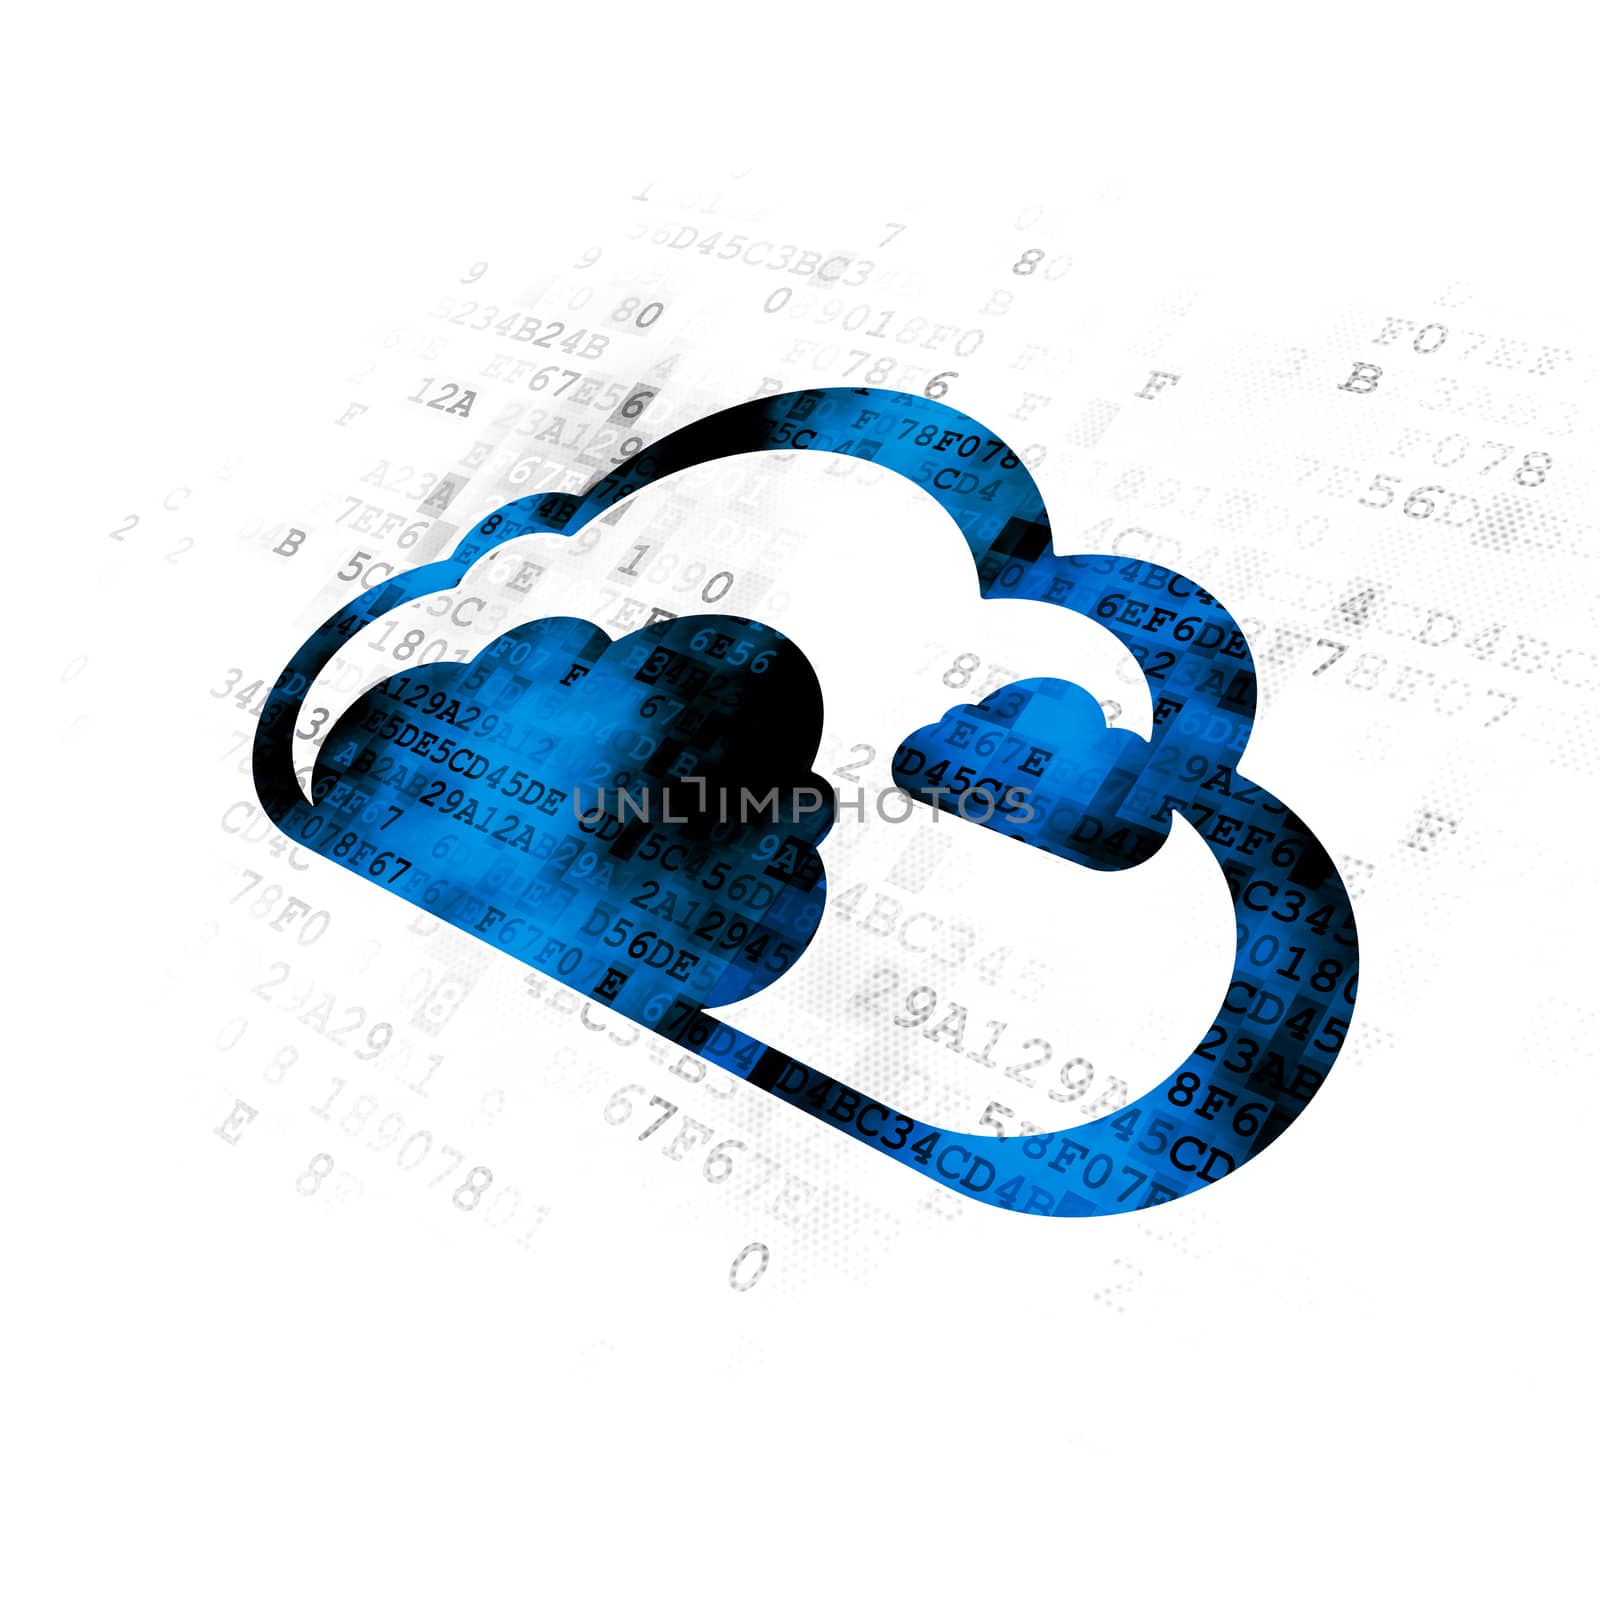 Cloud networking concept: Pixelated blue Cloud icon on Digital background